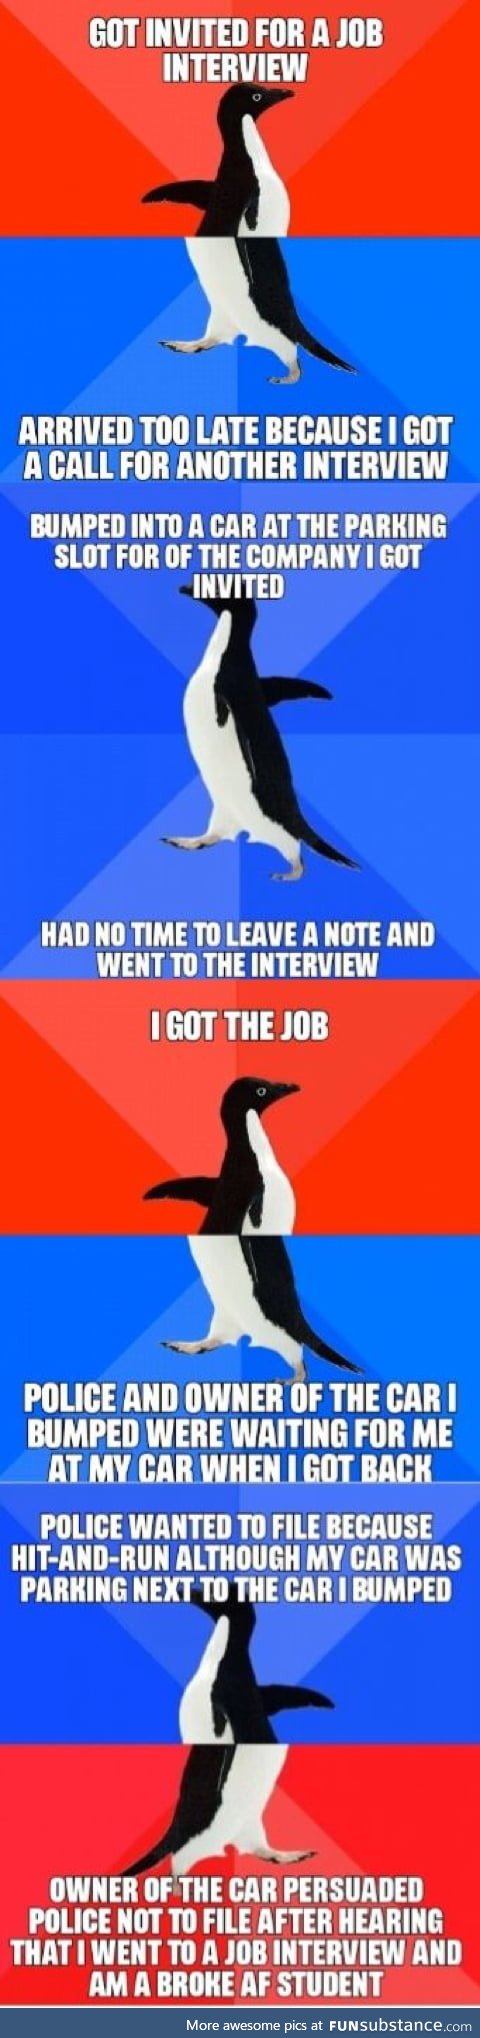 After that I got the other job as well